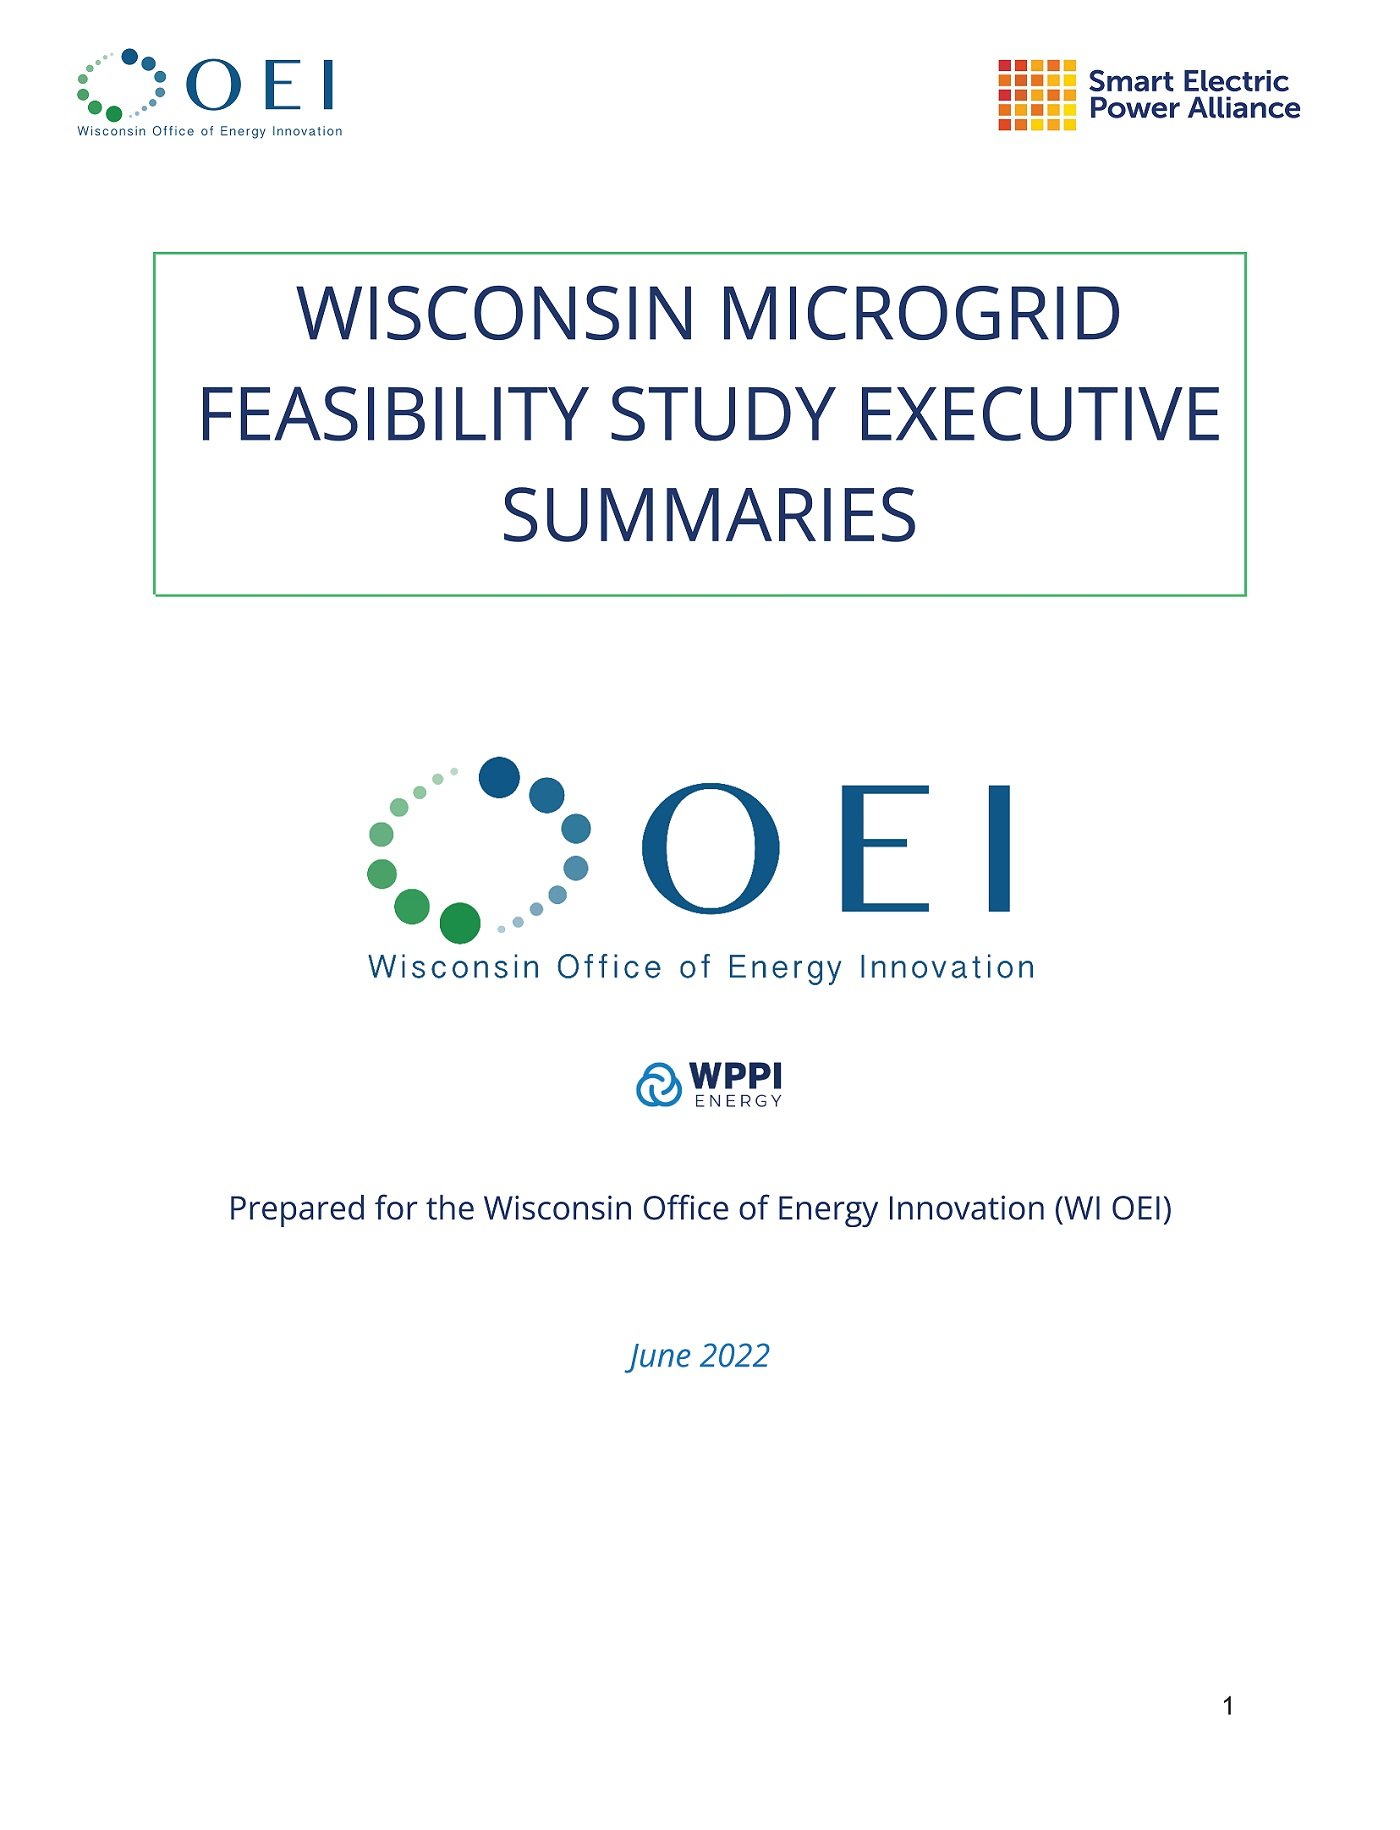 Microgrid Feasibility Studies – Wisconsin Office of Energy Innovation Grant